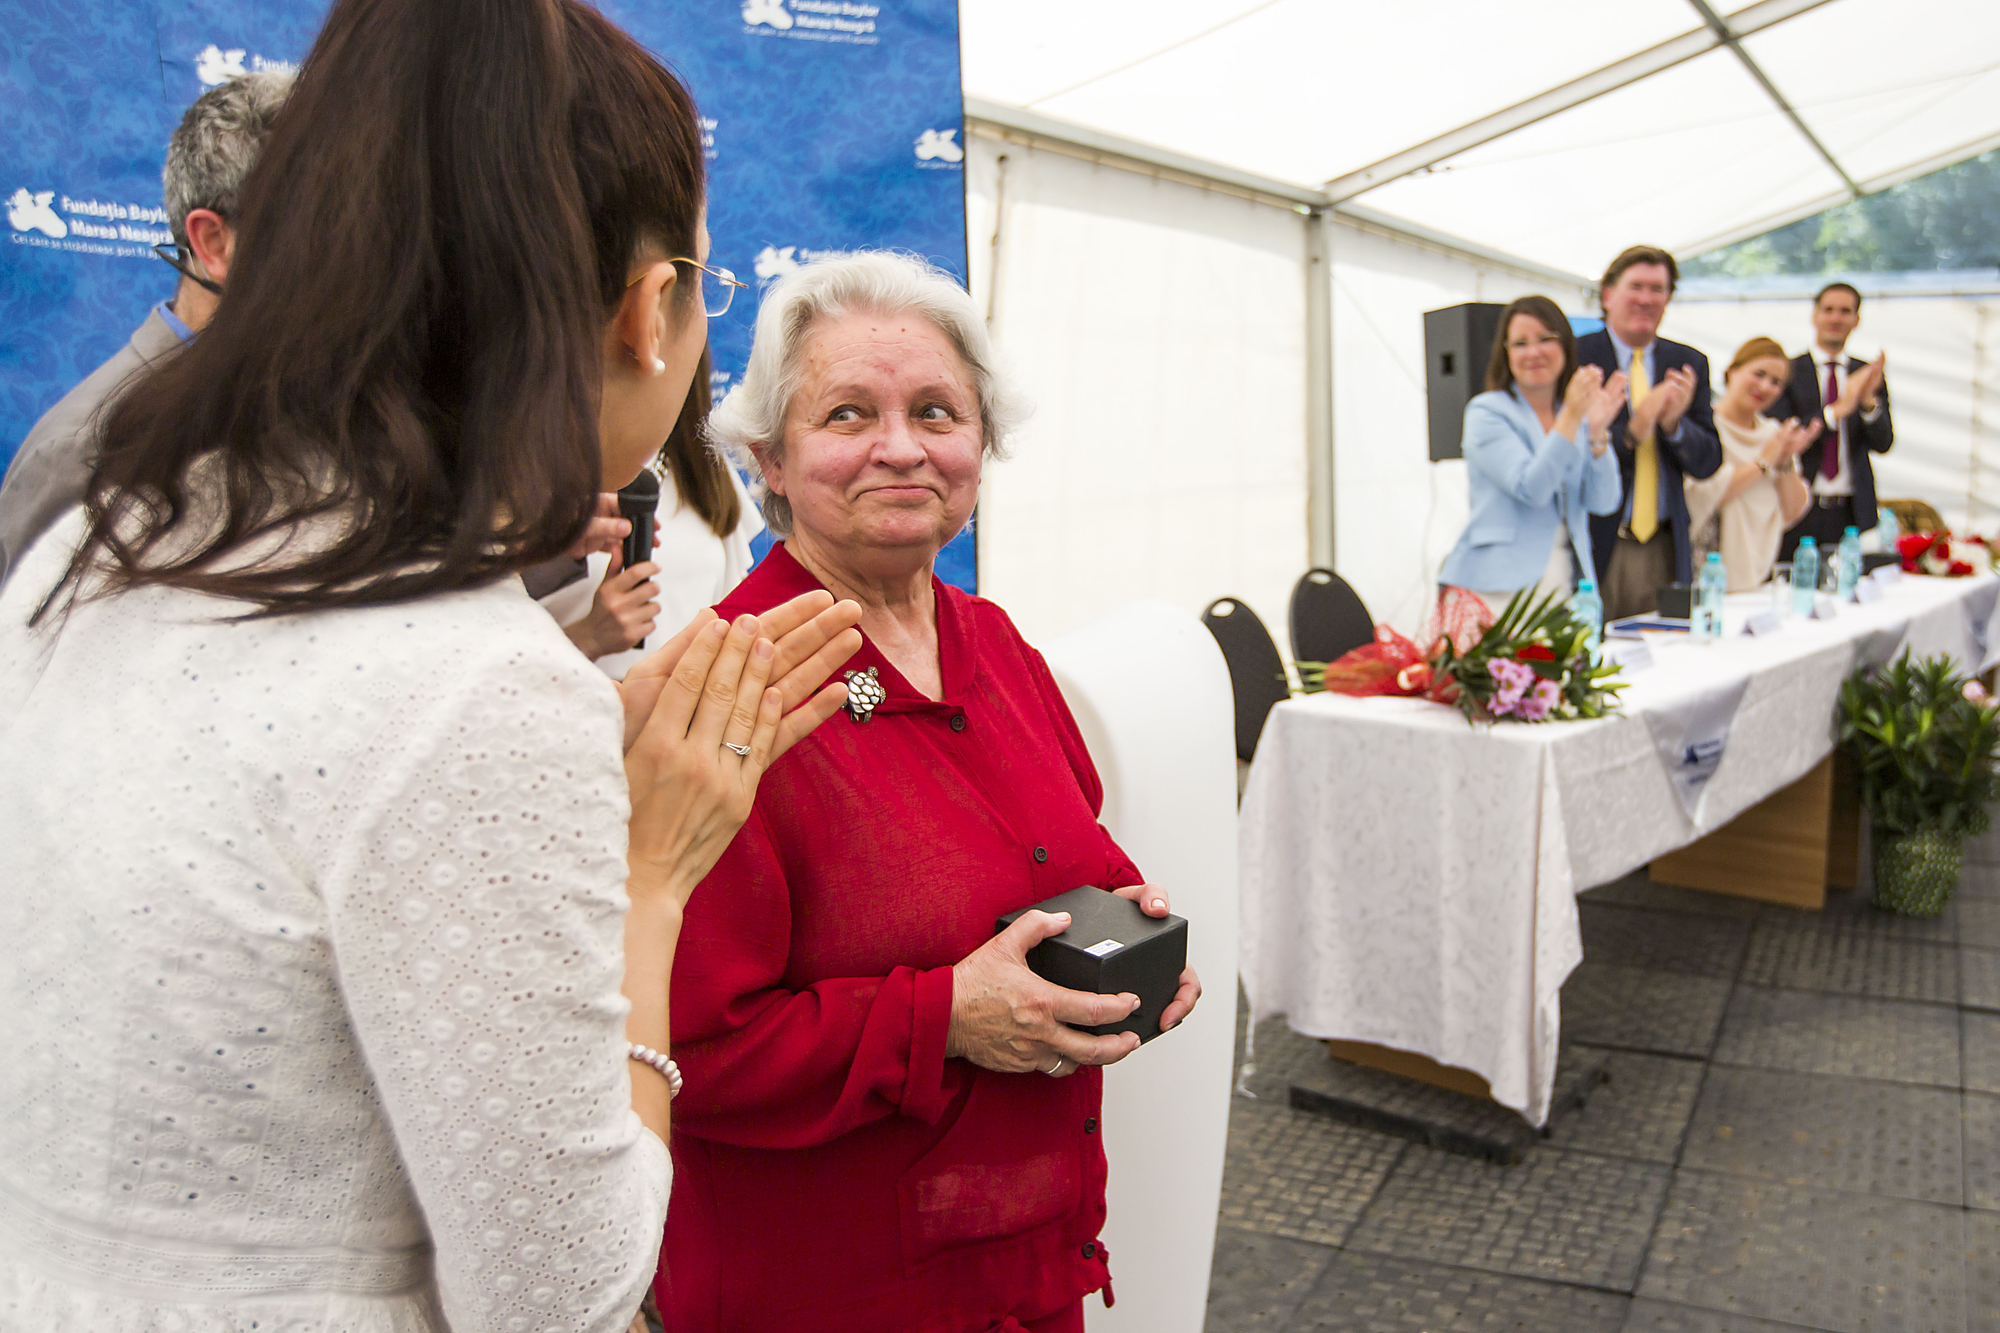 Ana-Maria Schweitzer, Executive Director, Romania, applauds Dr. Rodica Matusa, who receives a standing ovation during a celebration of the opening of the expansion of the Baylor Black Sea Foundation Center of Excellence on Tuesday, June 7, 2016, in Constanta, Romania. ( Photo by  Smiley N. Pool / © 2016  )